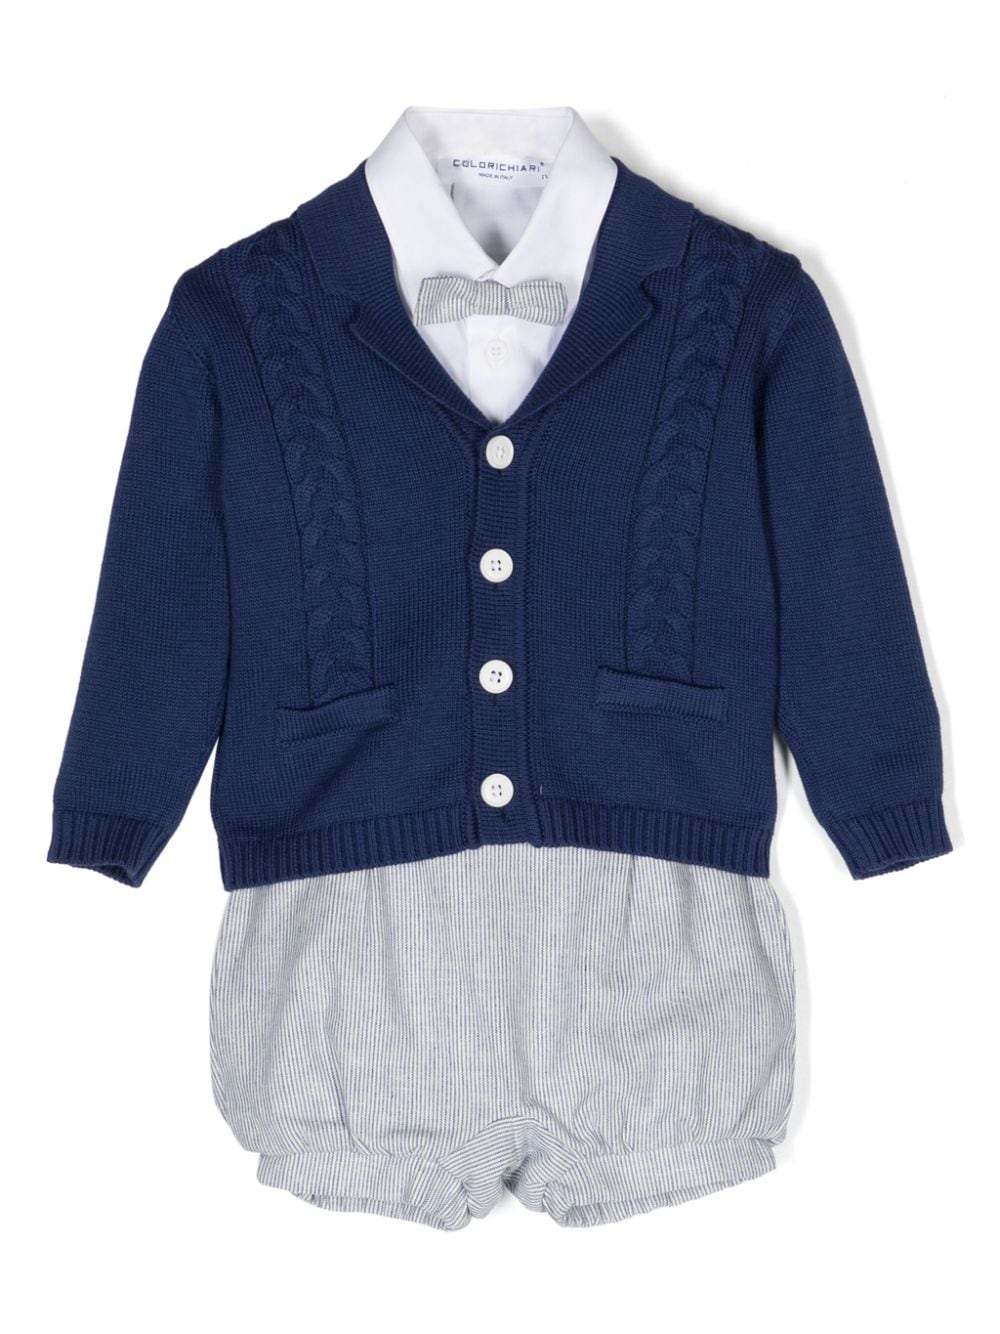 Elegant blue and white outfit for newborns